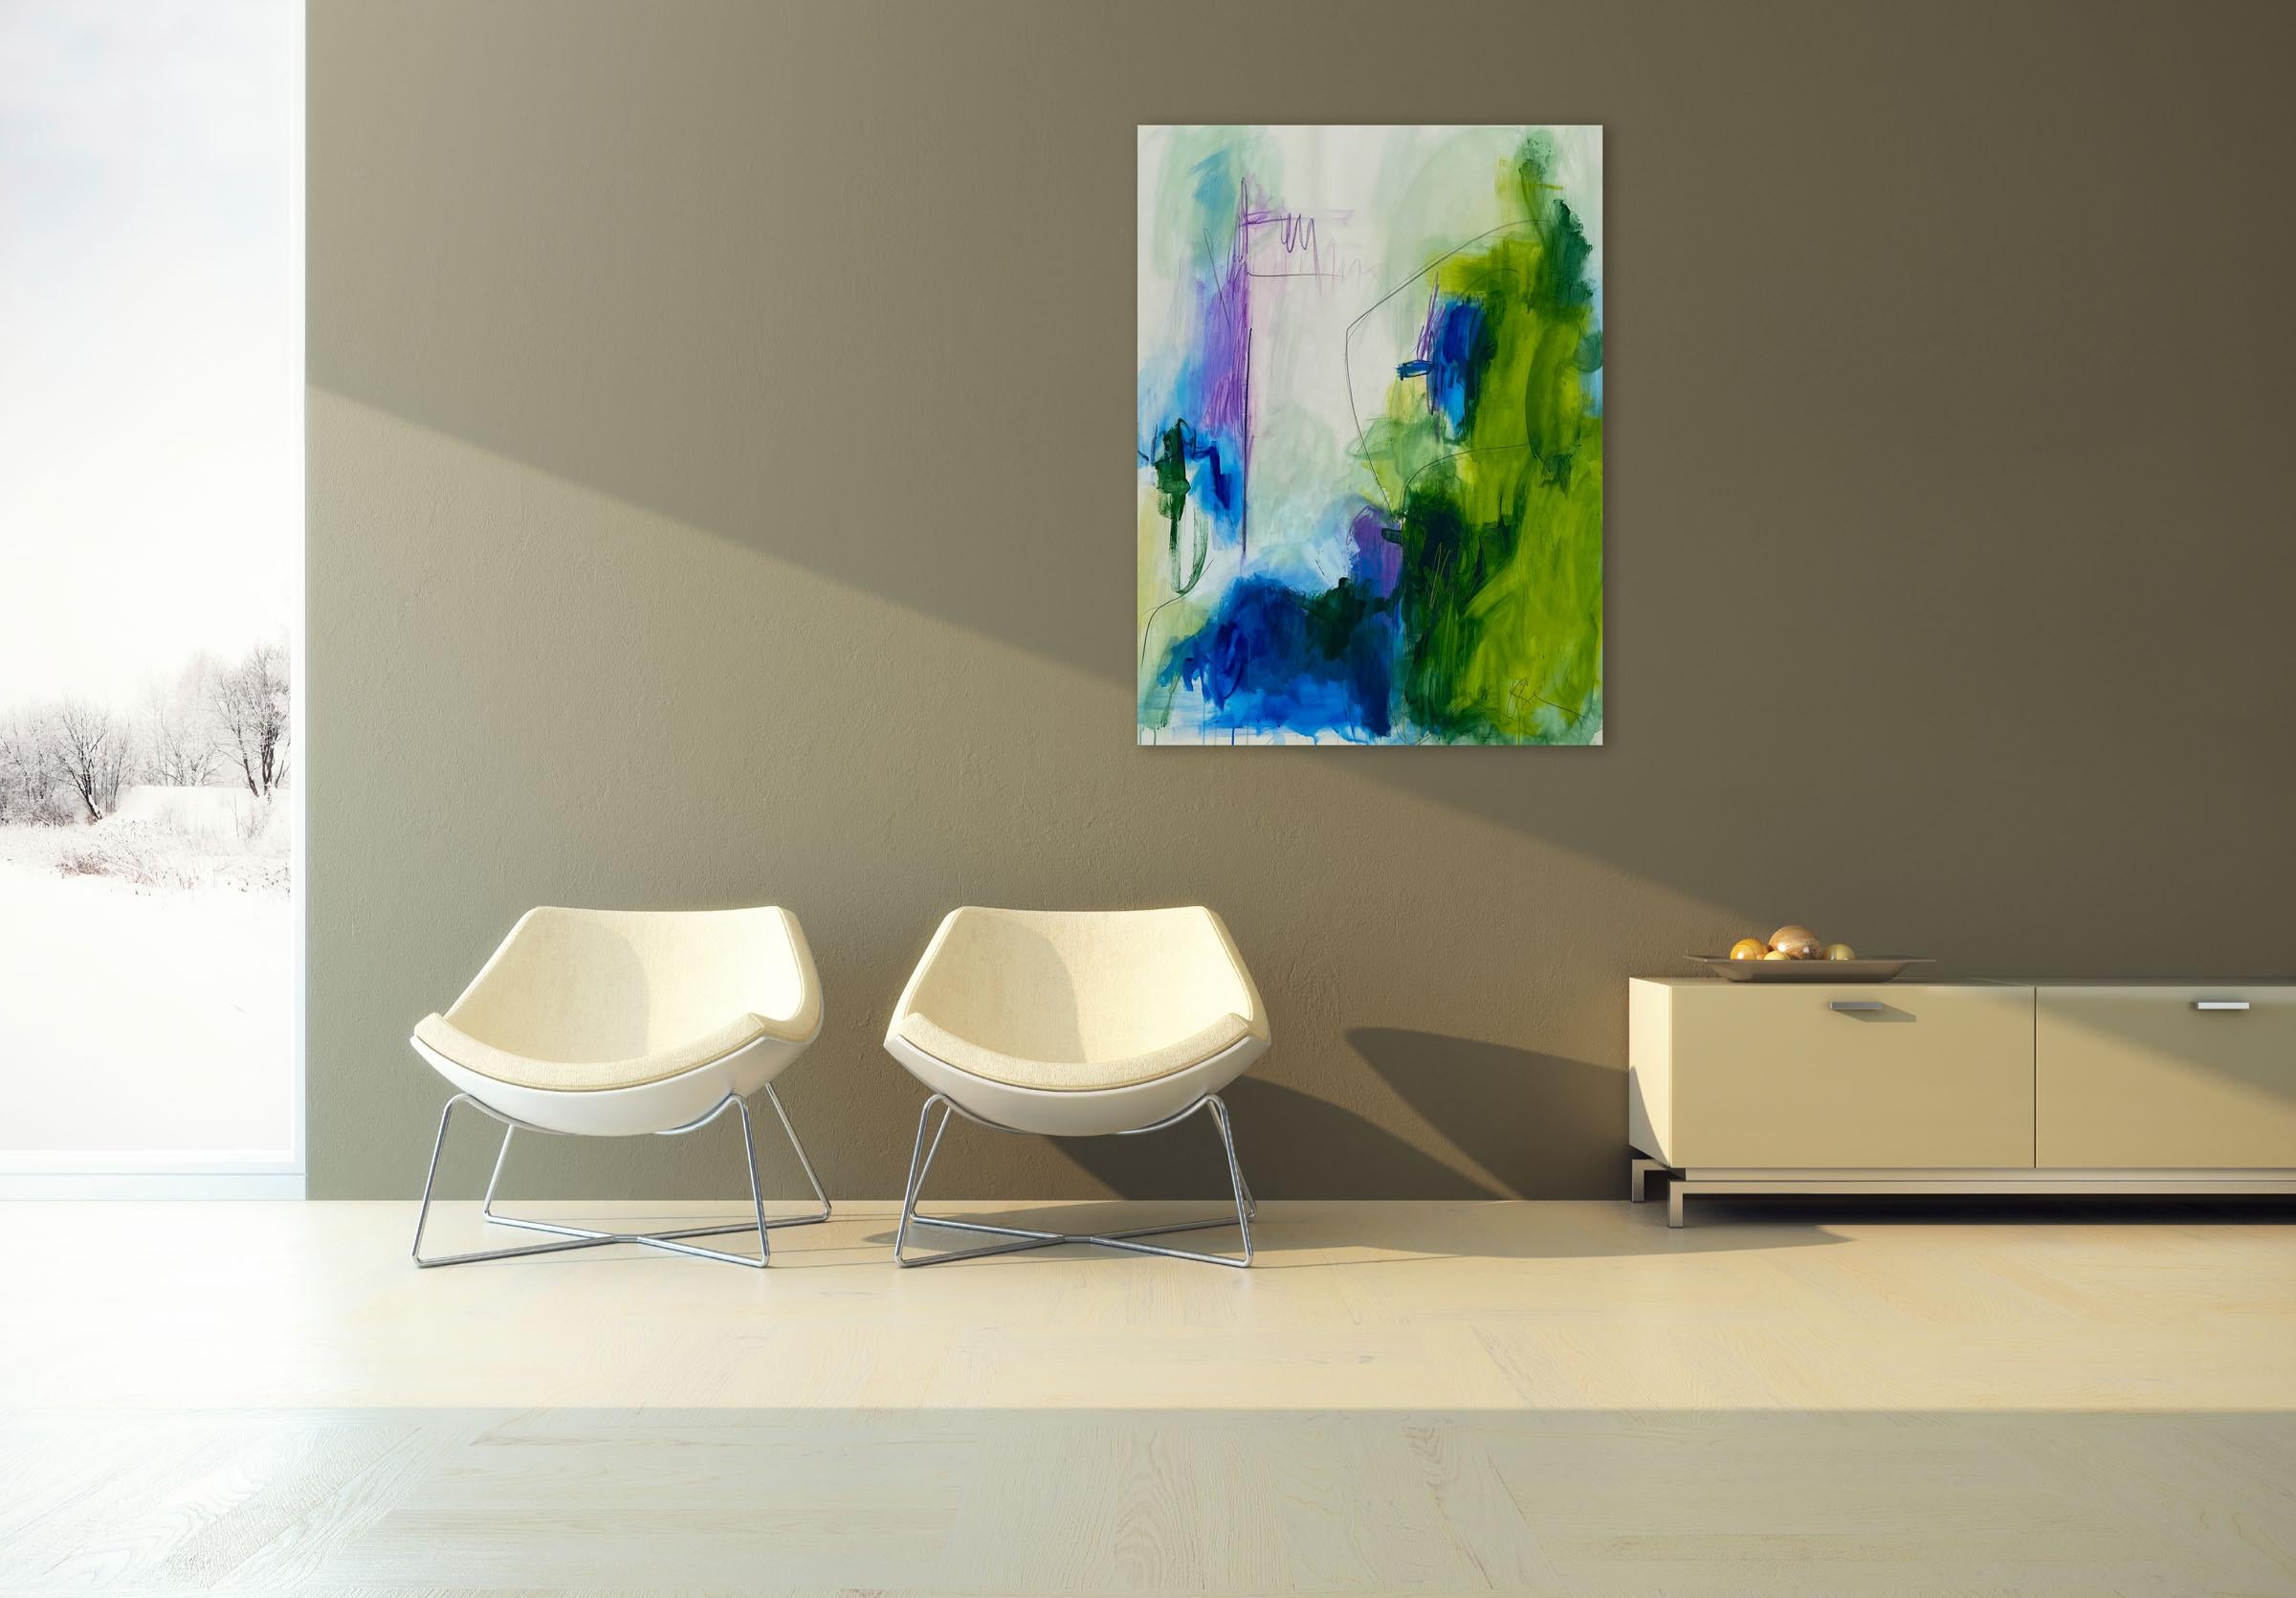 Vertical garden 1 (Abstract painting) - Painting by Adrienn Krahl